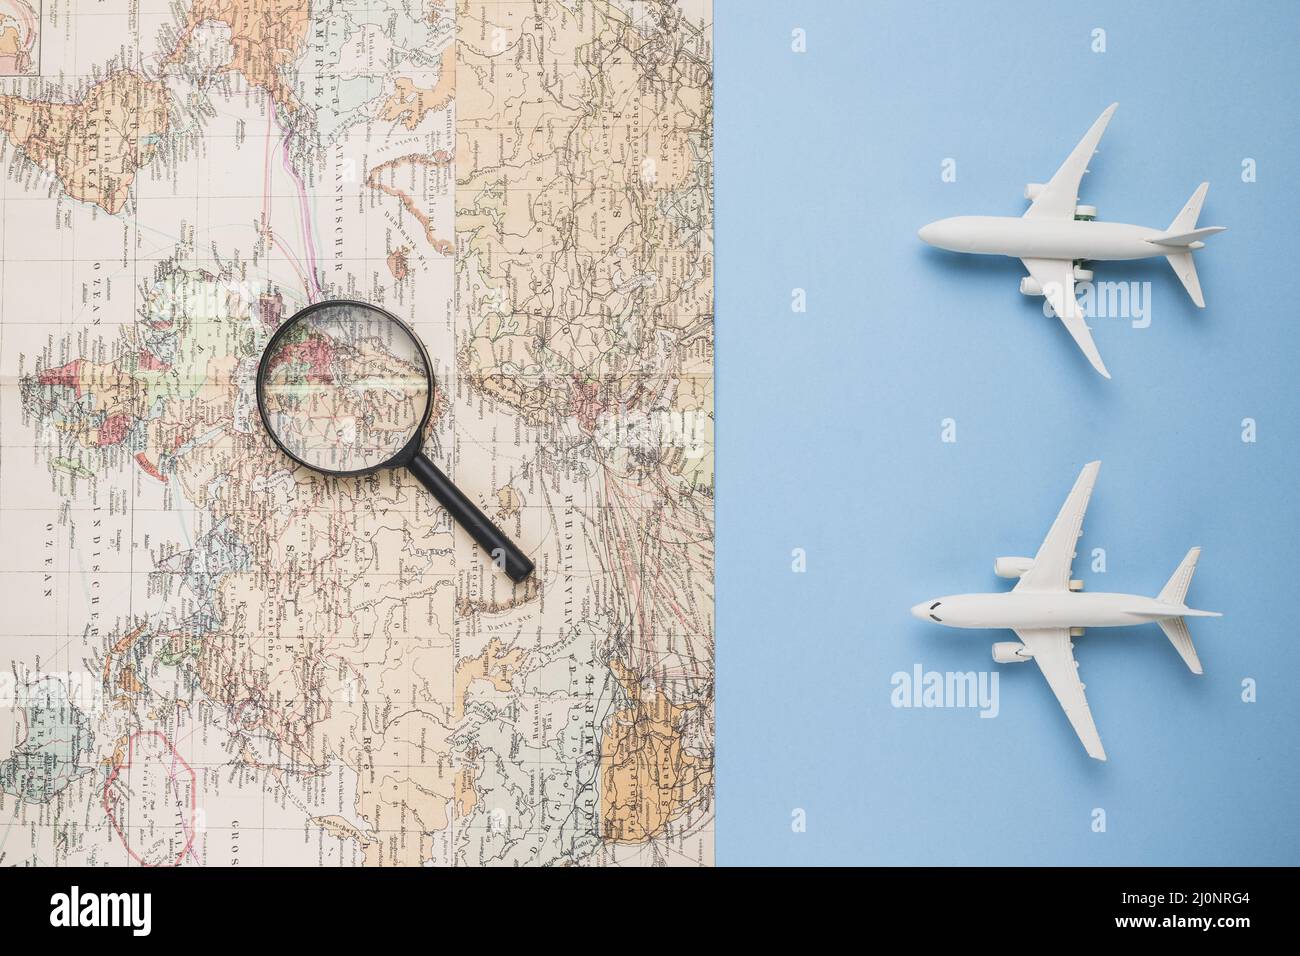 Travel concept with map plane. High quality and resolution beautiful photo concept Stock Photo